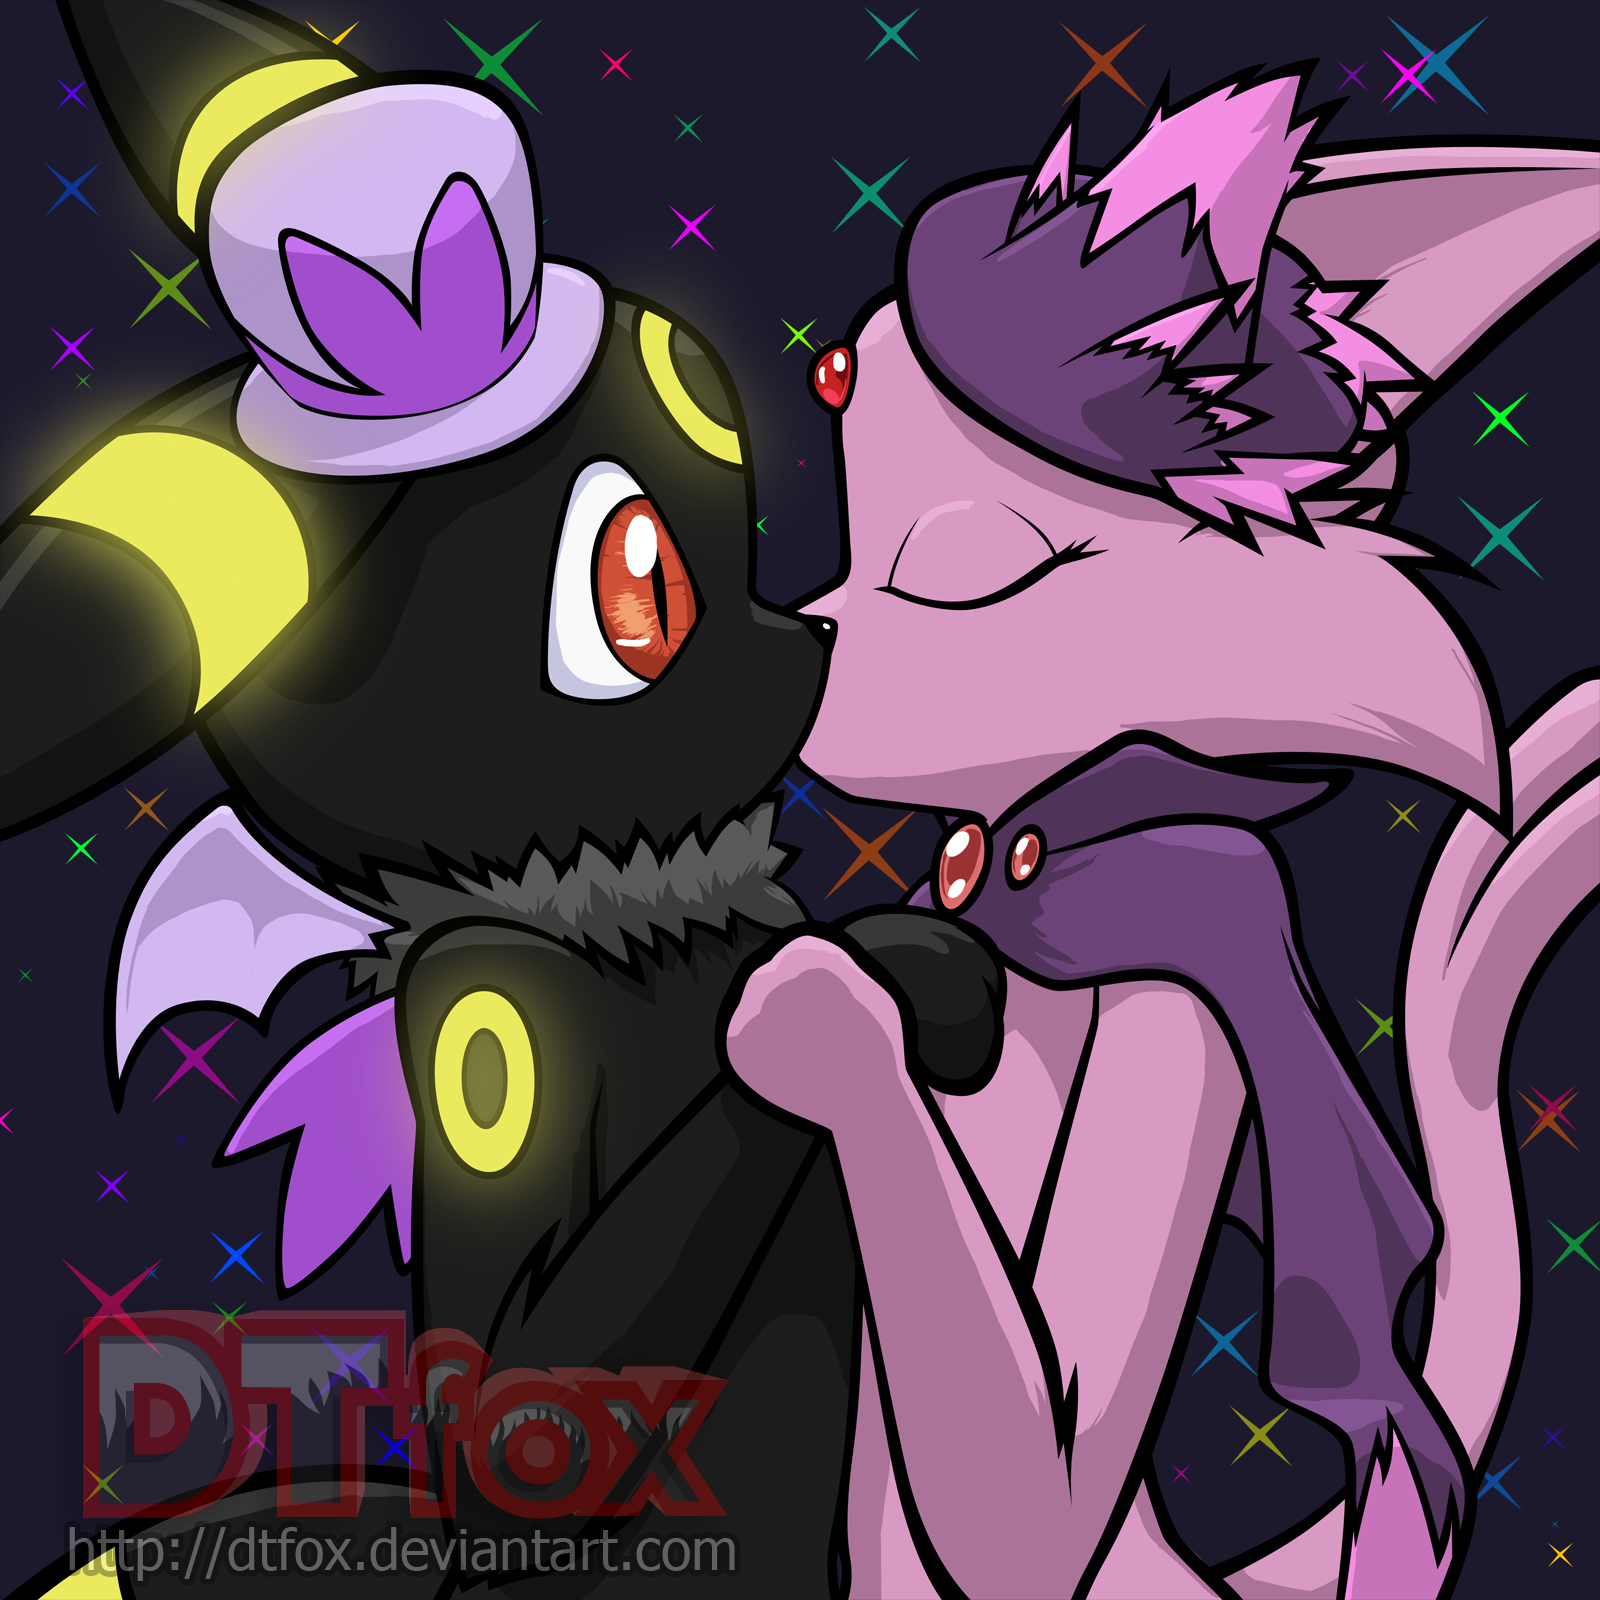 An anthro Espeon gives a surprise kiss to an anthro Umbreon during a costume party